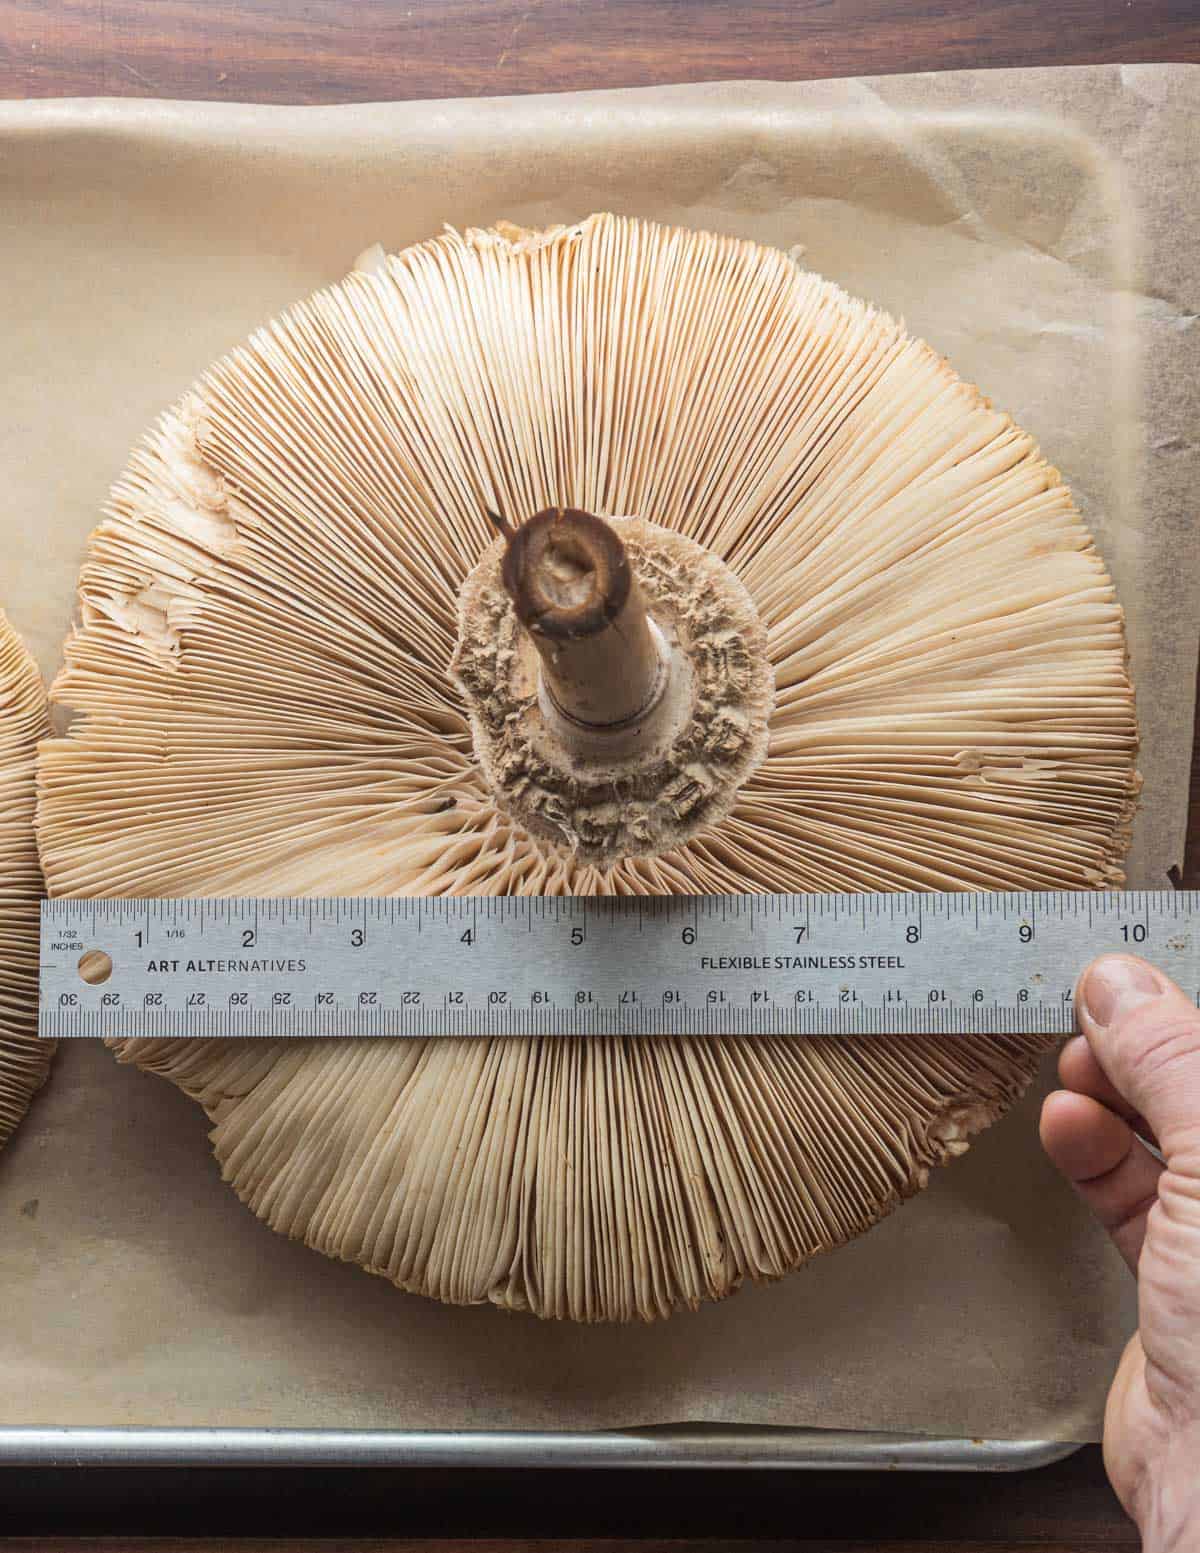 A large parasol mushroom next to a ruler to show the cap is over 10 inches across in diameter. 